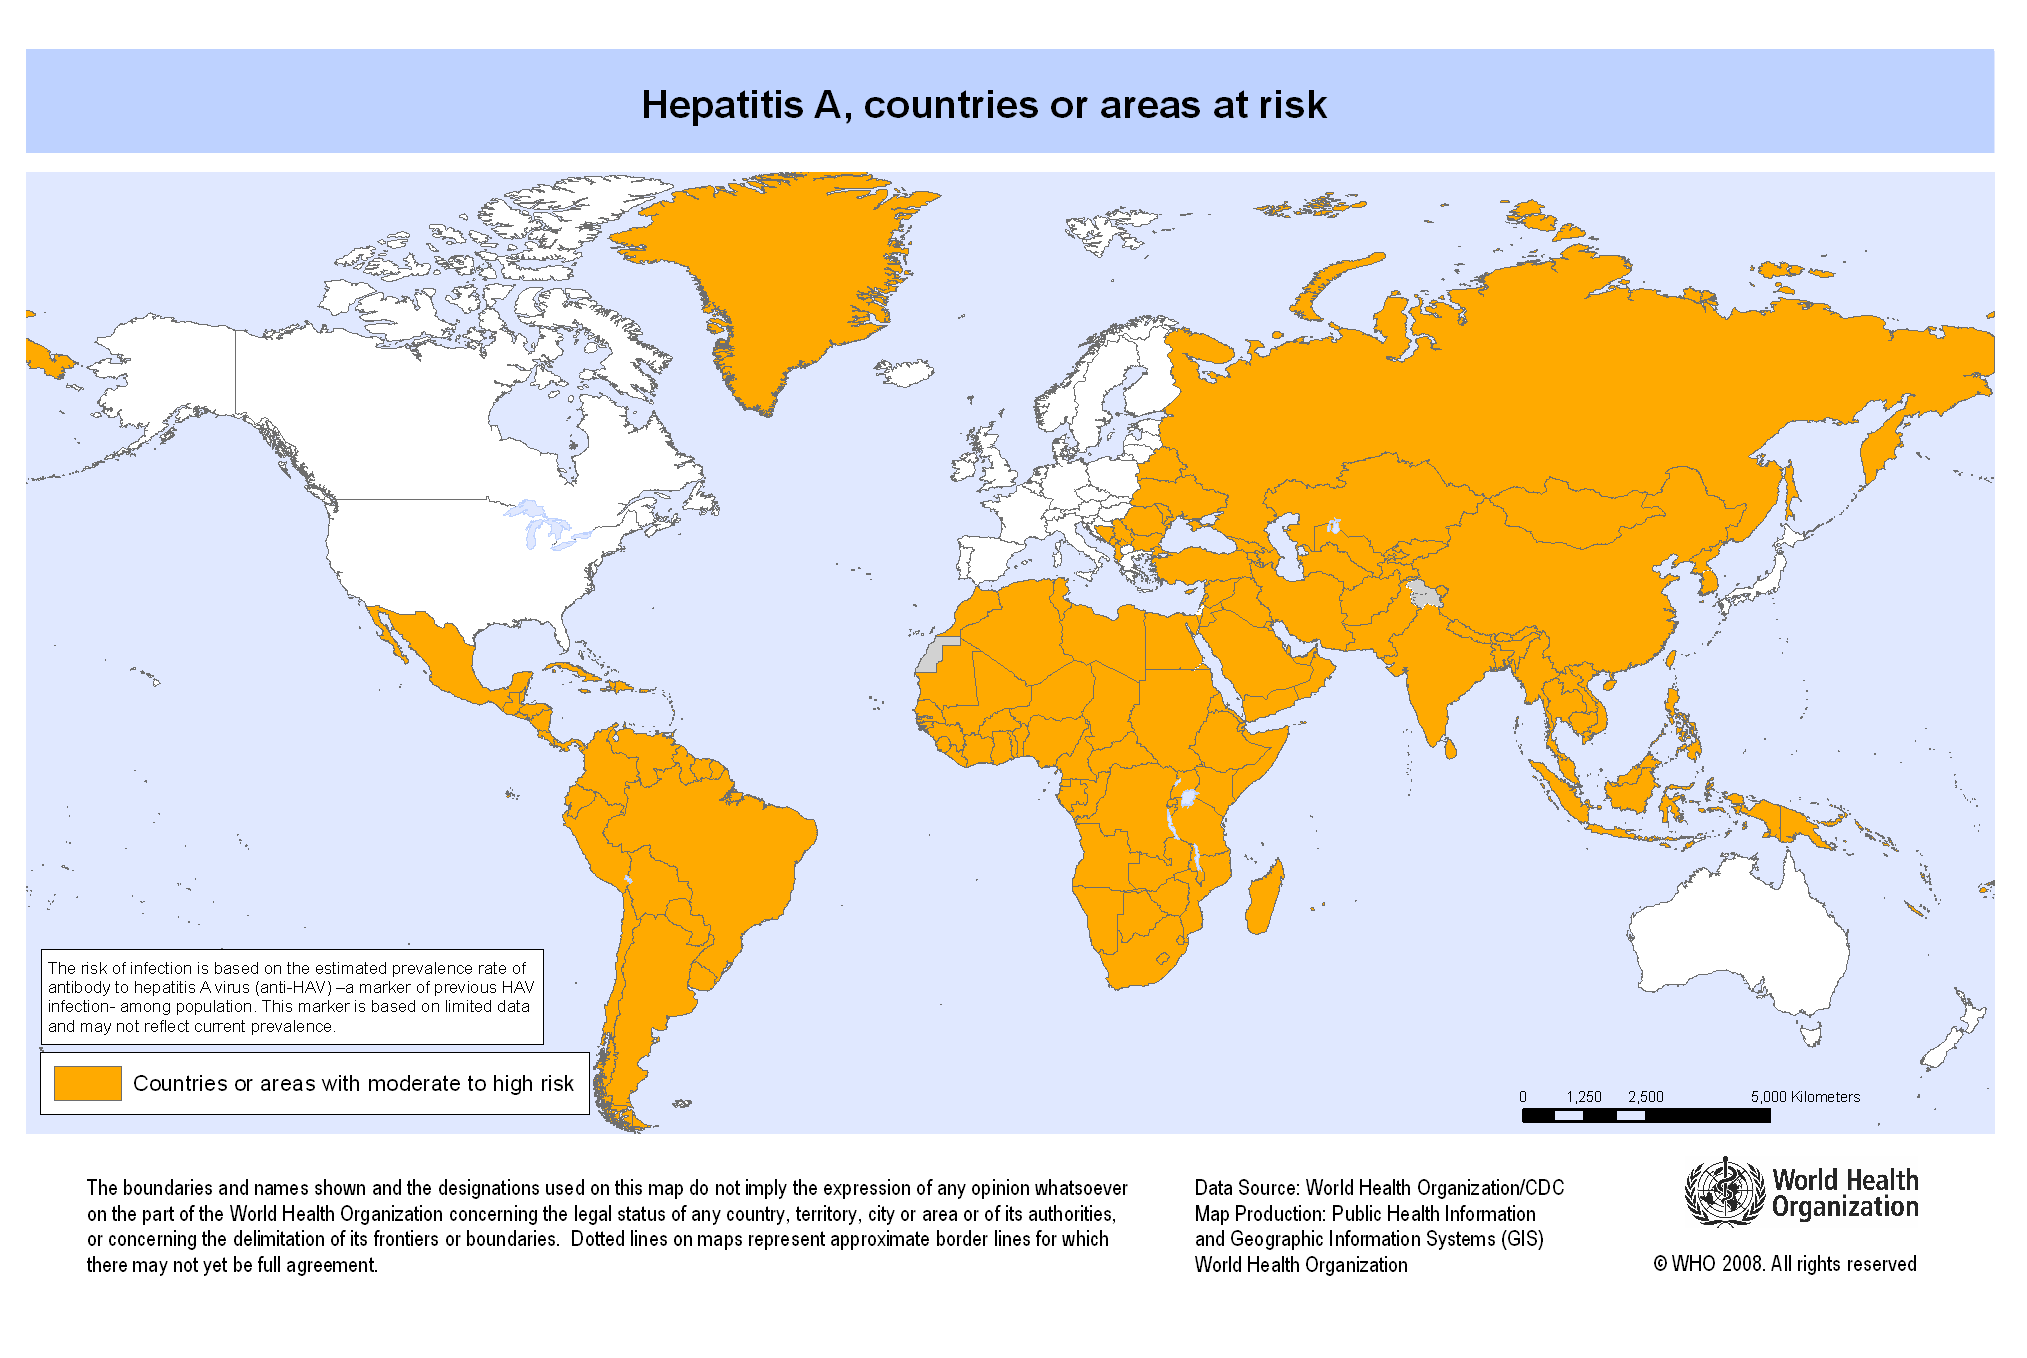 Areas of risk for Hepatitis A